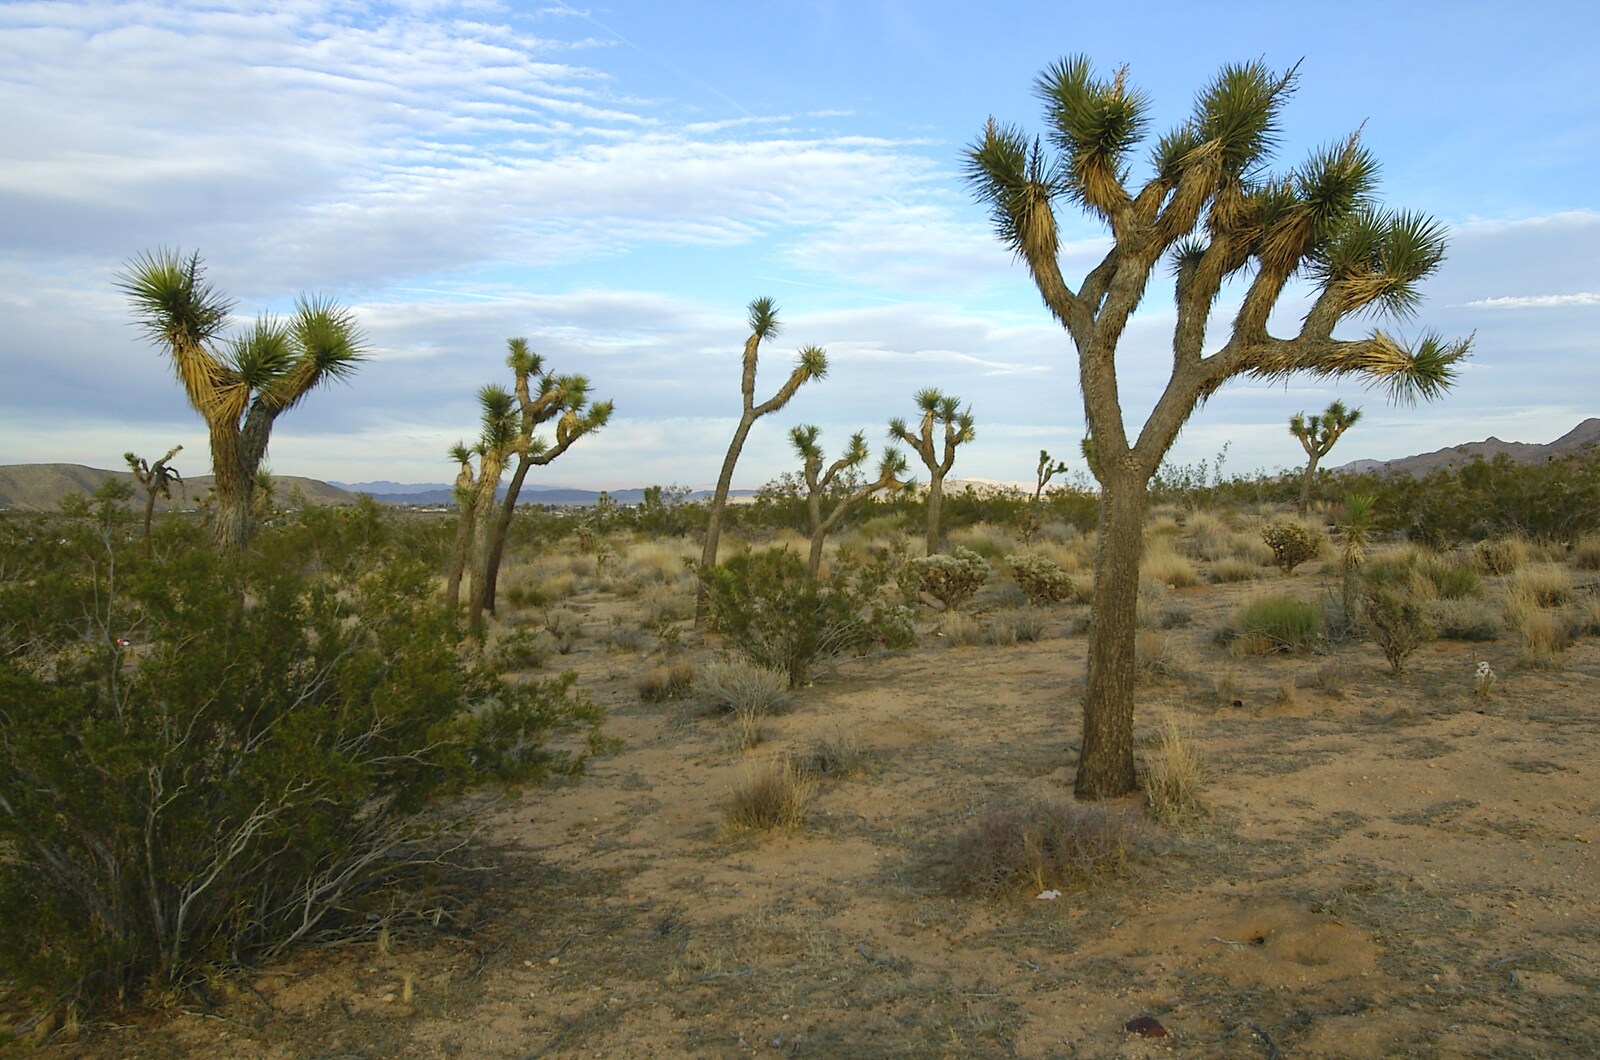 The famous trees of Joshua Tree from Mojave Desert: San Diego to Joshua Tree and Twentynine Palms, California, US - 5th March 2006